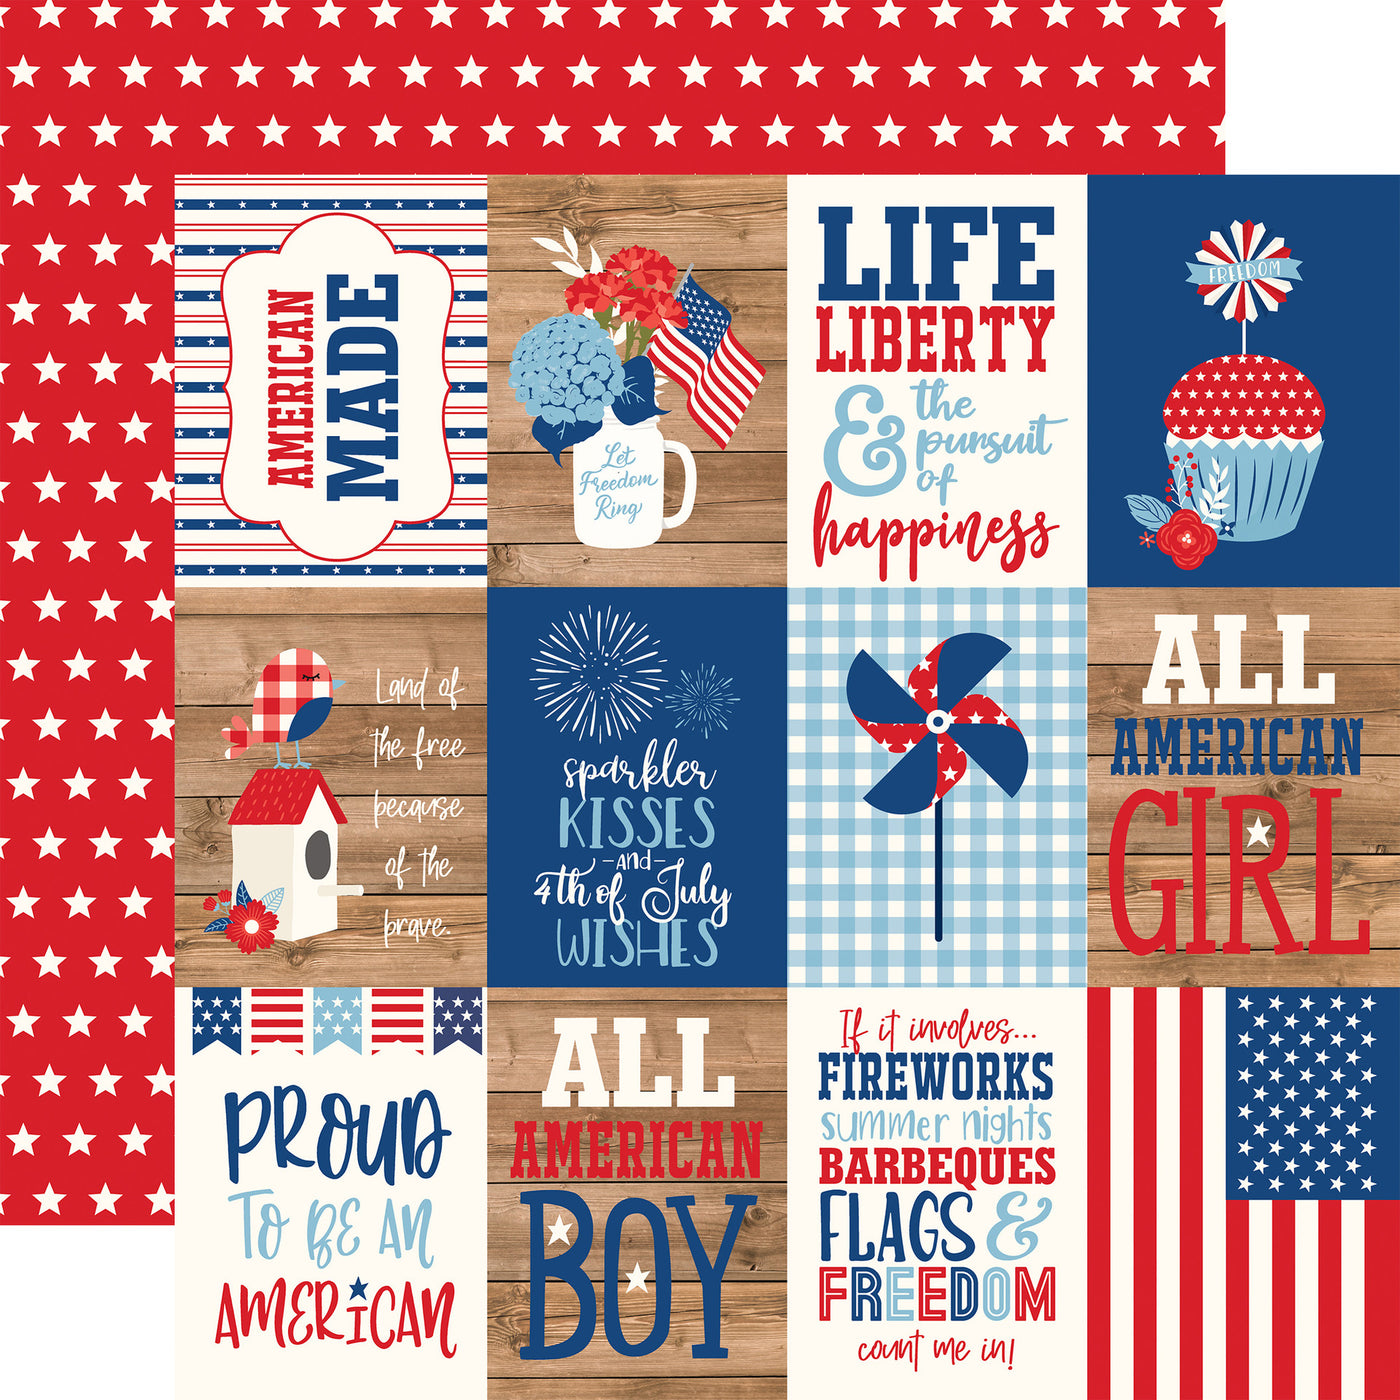 12x12 double-sided patterned paper - (Side A - red, white, and blue patriotic journaling cards; Side B - white stars with a red background) - Echo Park Paper.